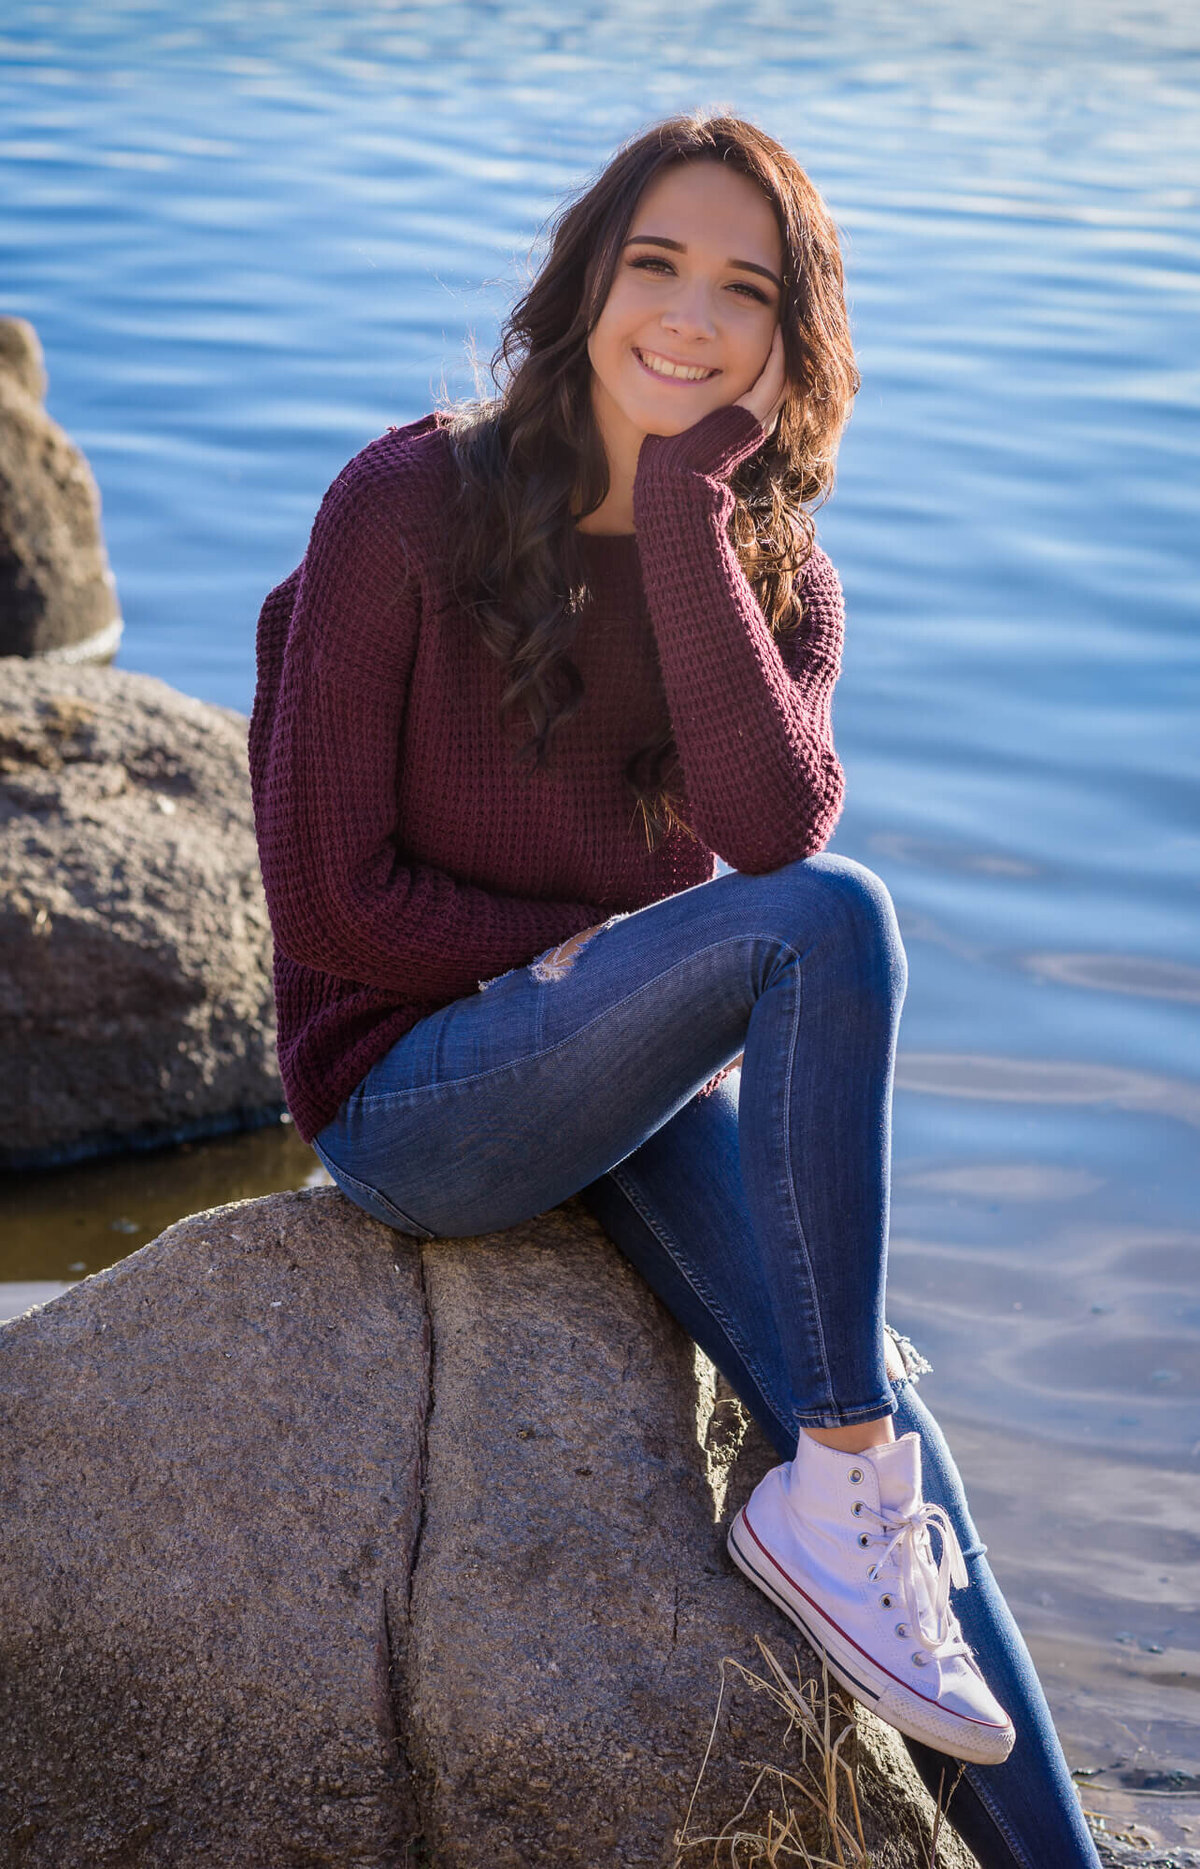 Prescott senior photos outdoors at Willow Lake with Melissa Byrne